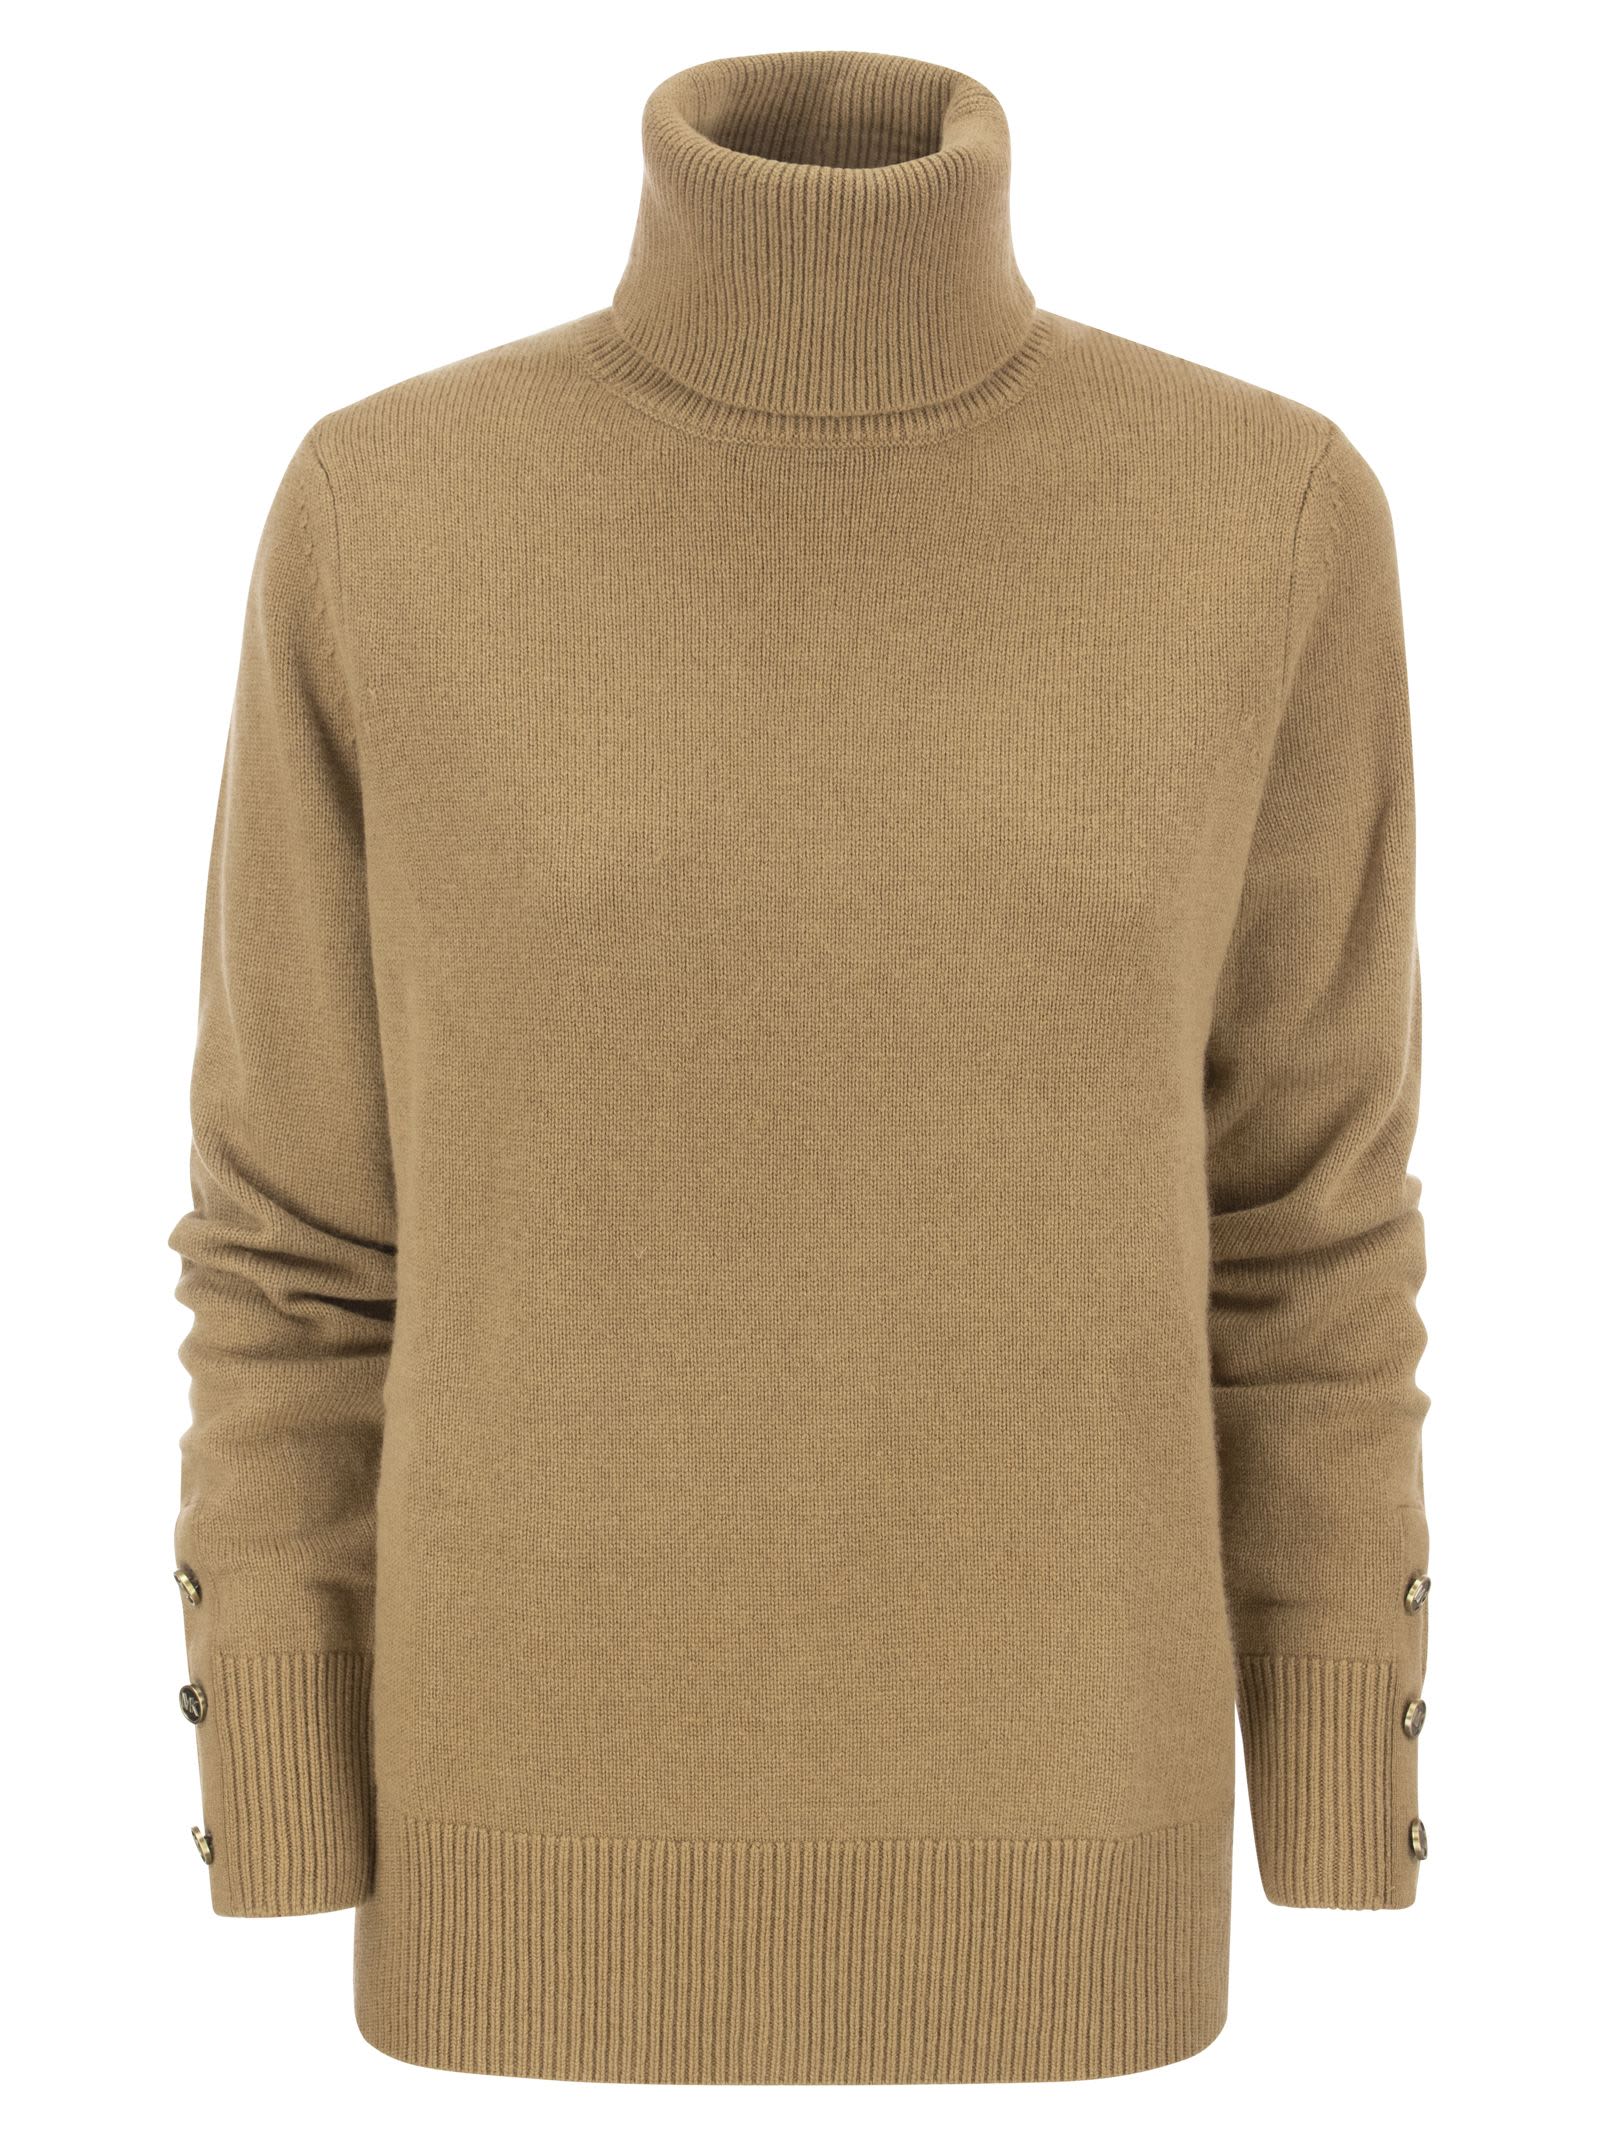 Michael Kors Wool And Cashmere Turtleneck Sweater